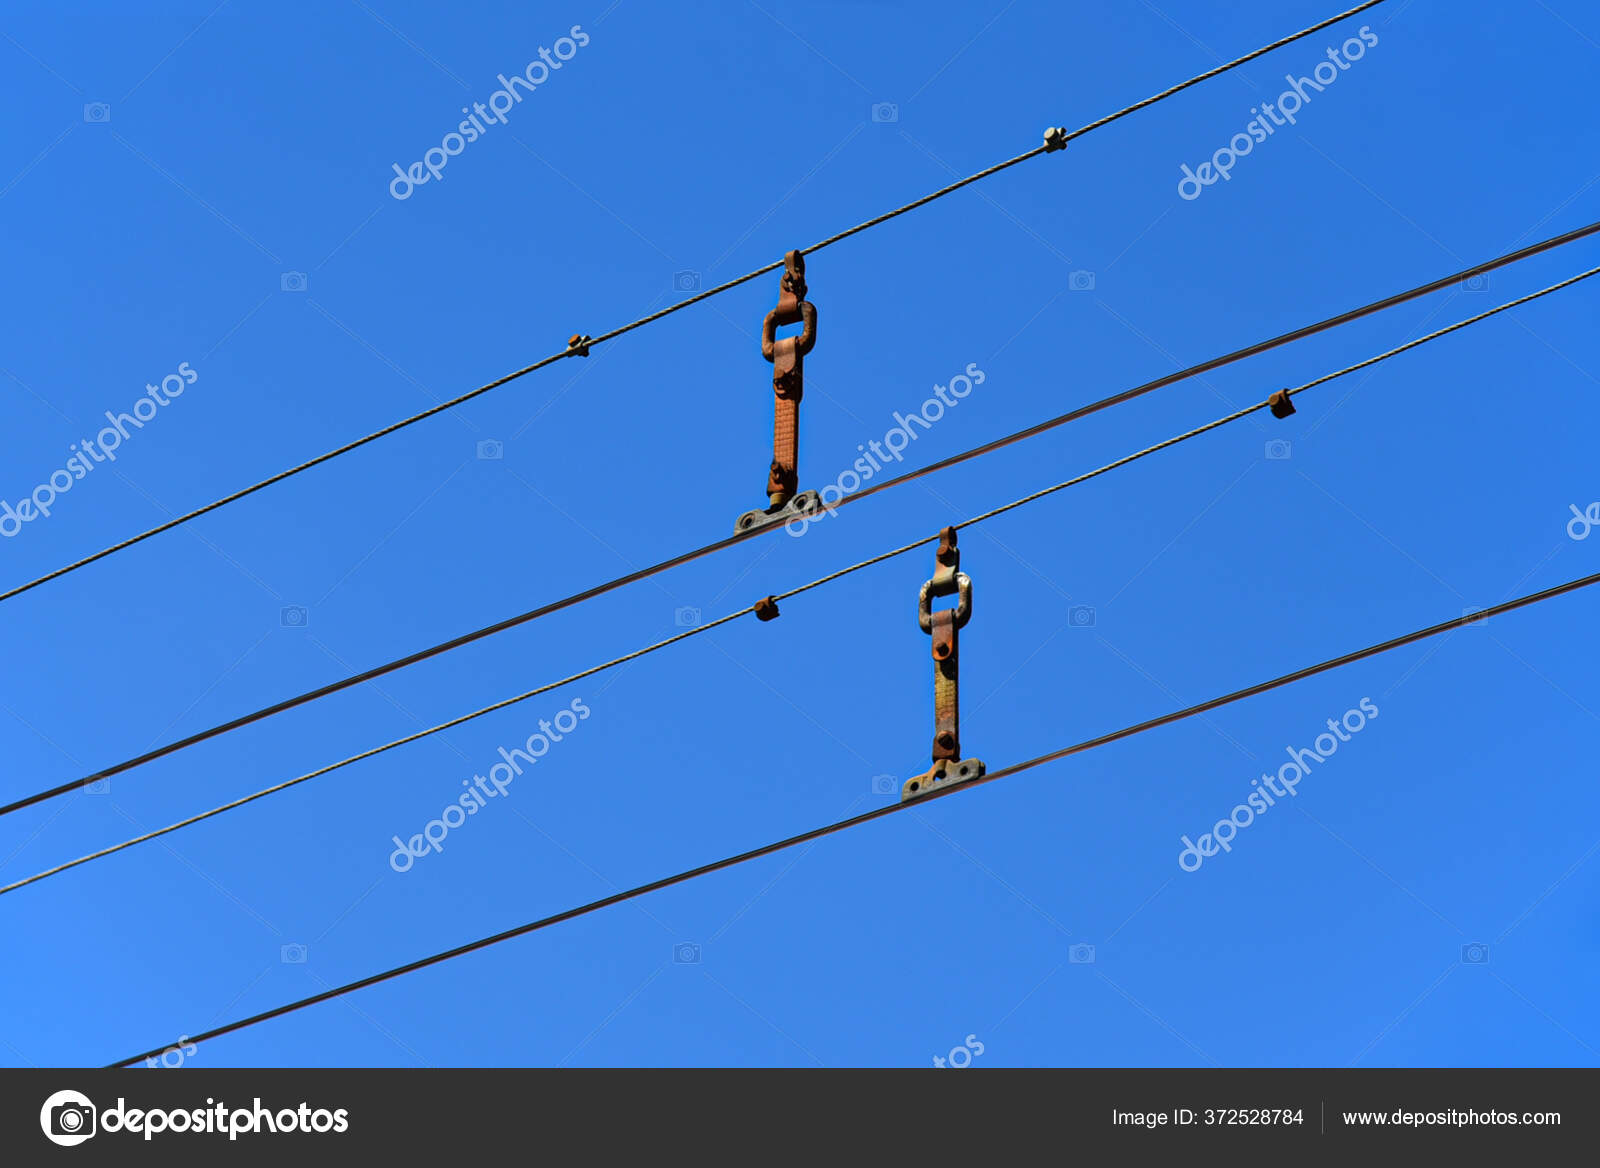 High Tension Wires Stock Photo, Picture and Royalty Free Image. Image  538319.